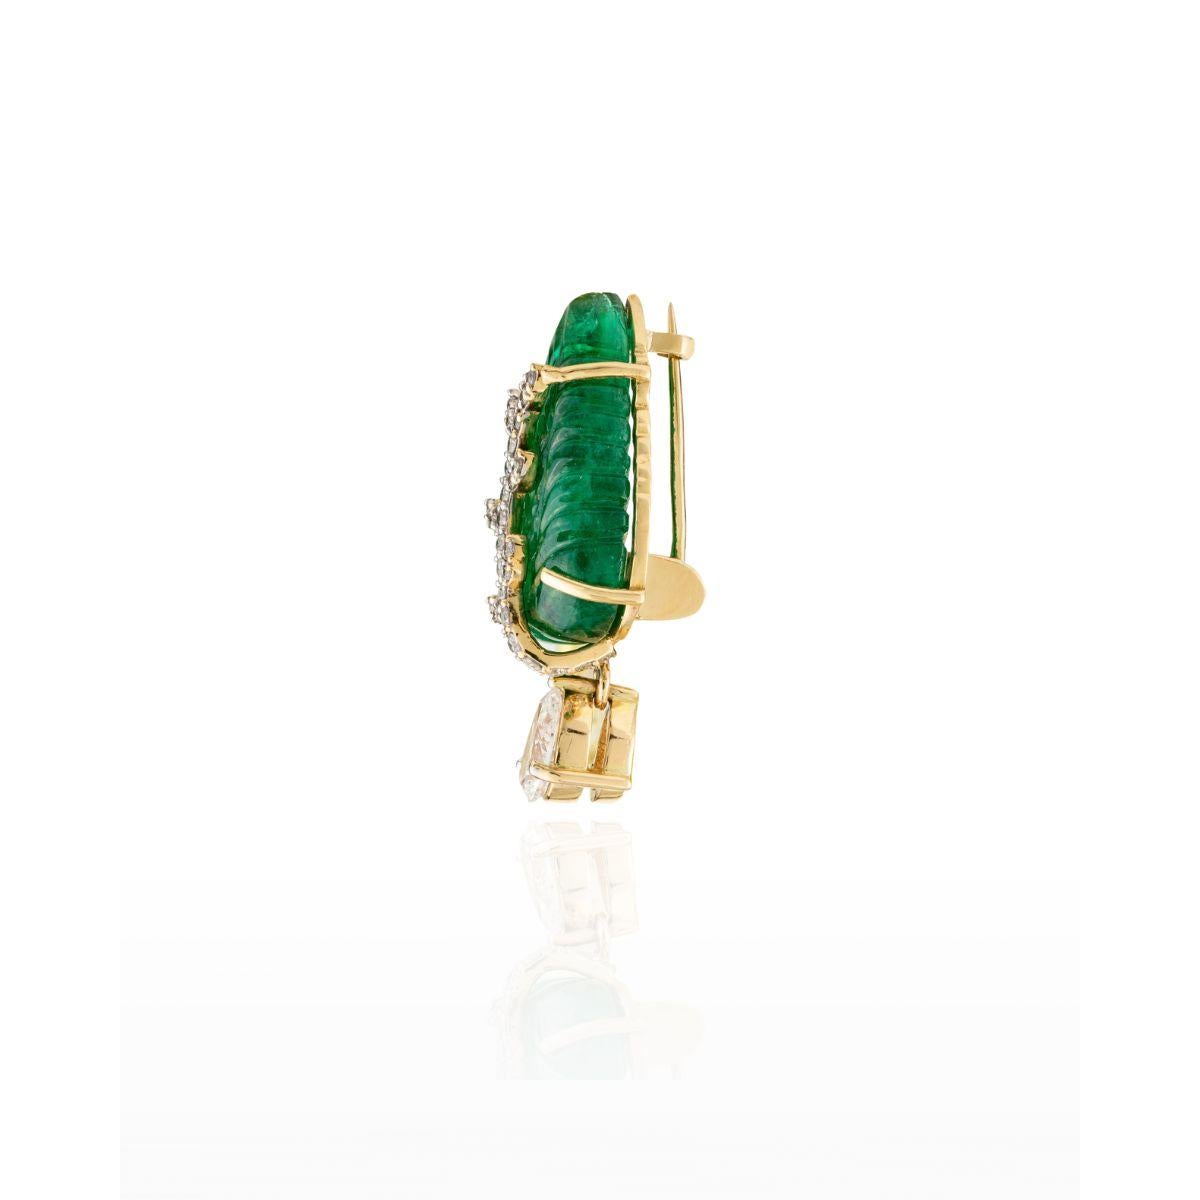 Contemporary Unisex 9.99 Carat Carved Leaf Emerald Brooch with Diamonds in 18k Yellow Gold For Sale